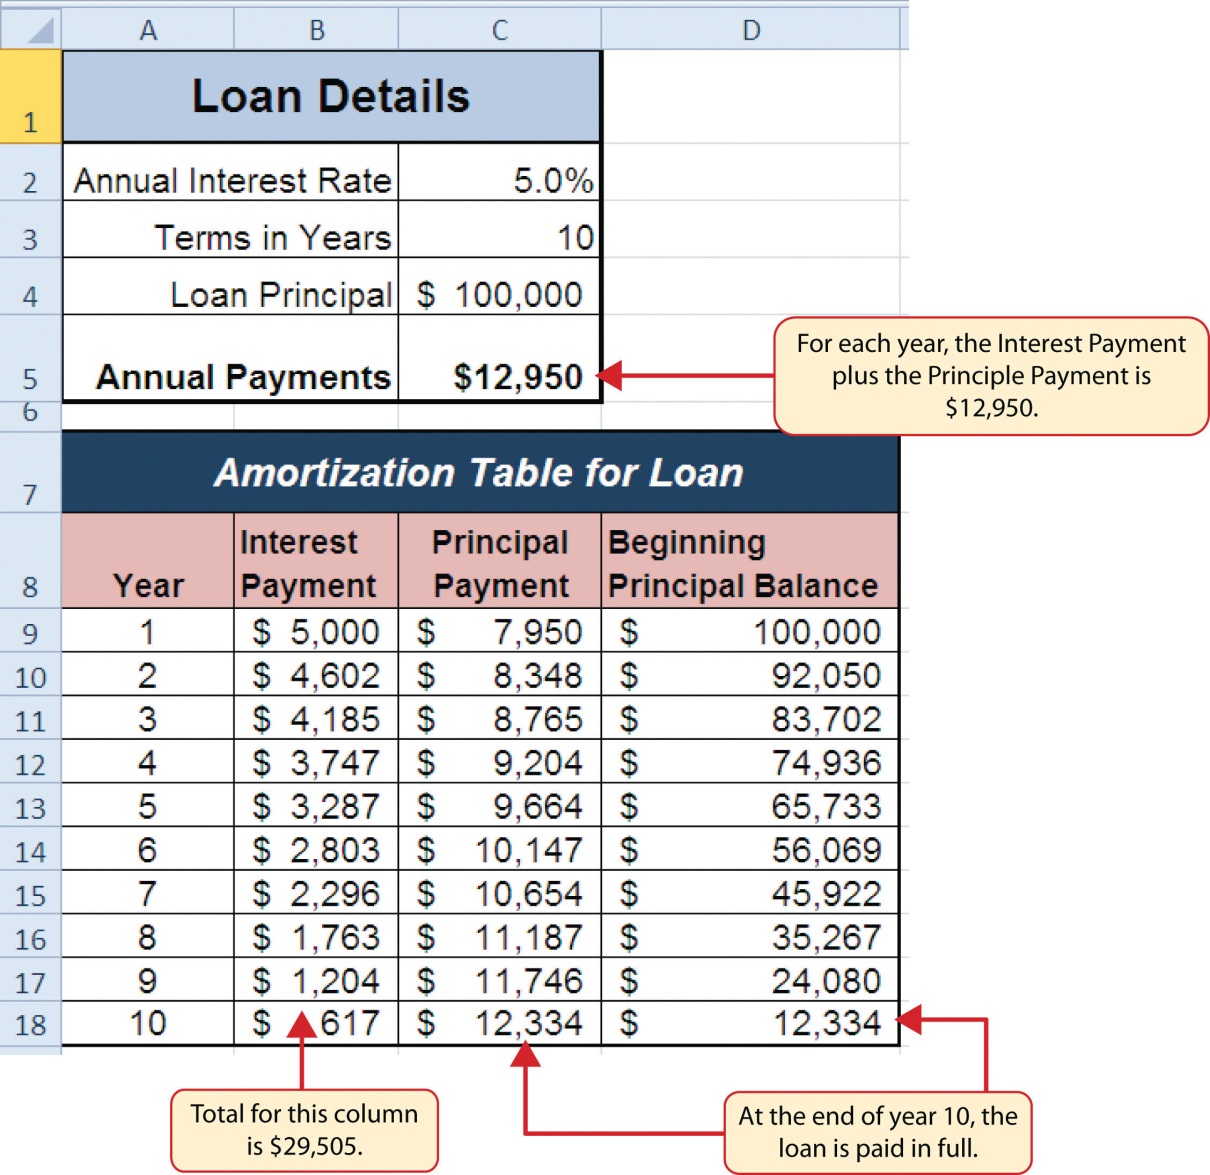 Amortization table for a $100,000 loan. For each year, Interest Payment plus Principal Payment is $12,950. At end of year 10, loan is paid in full.